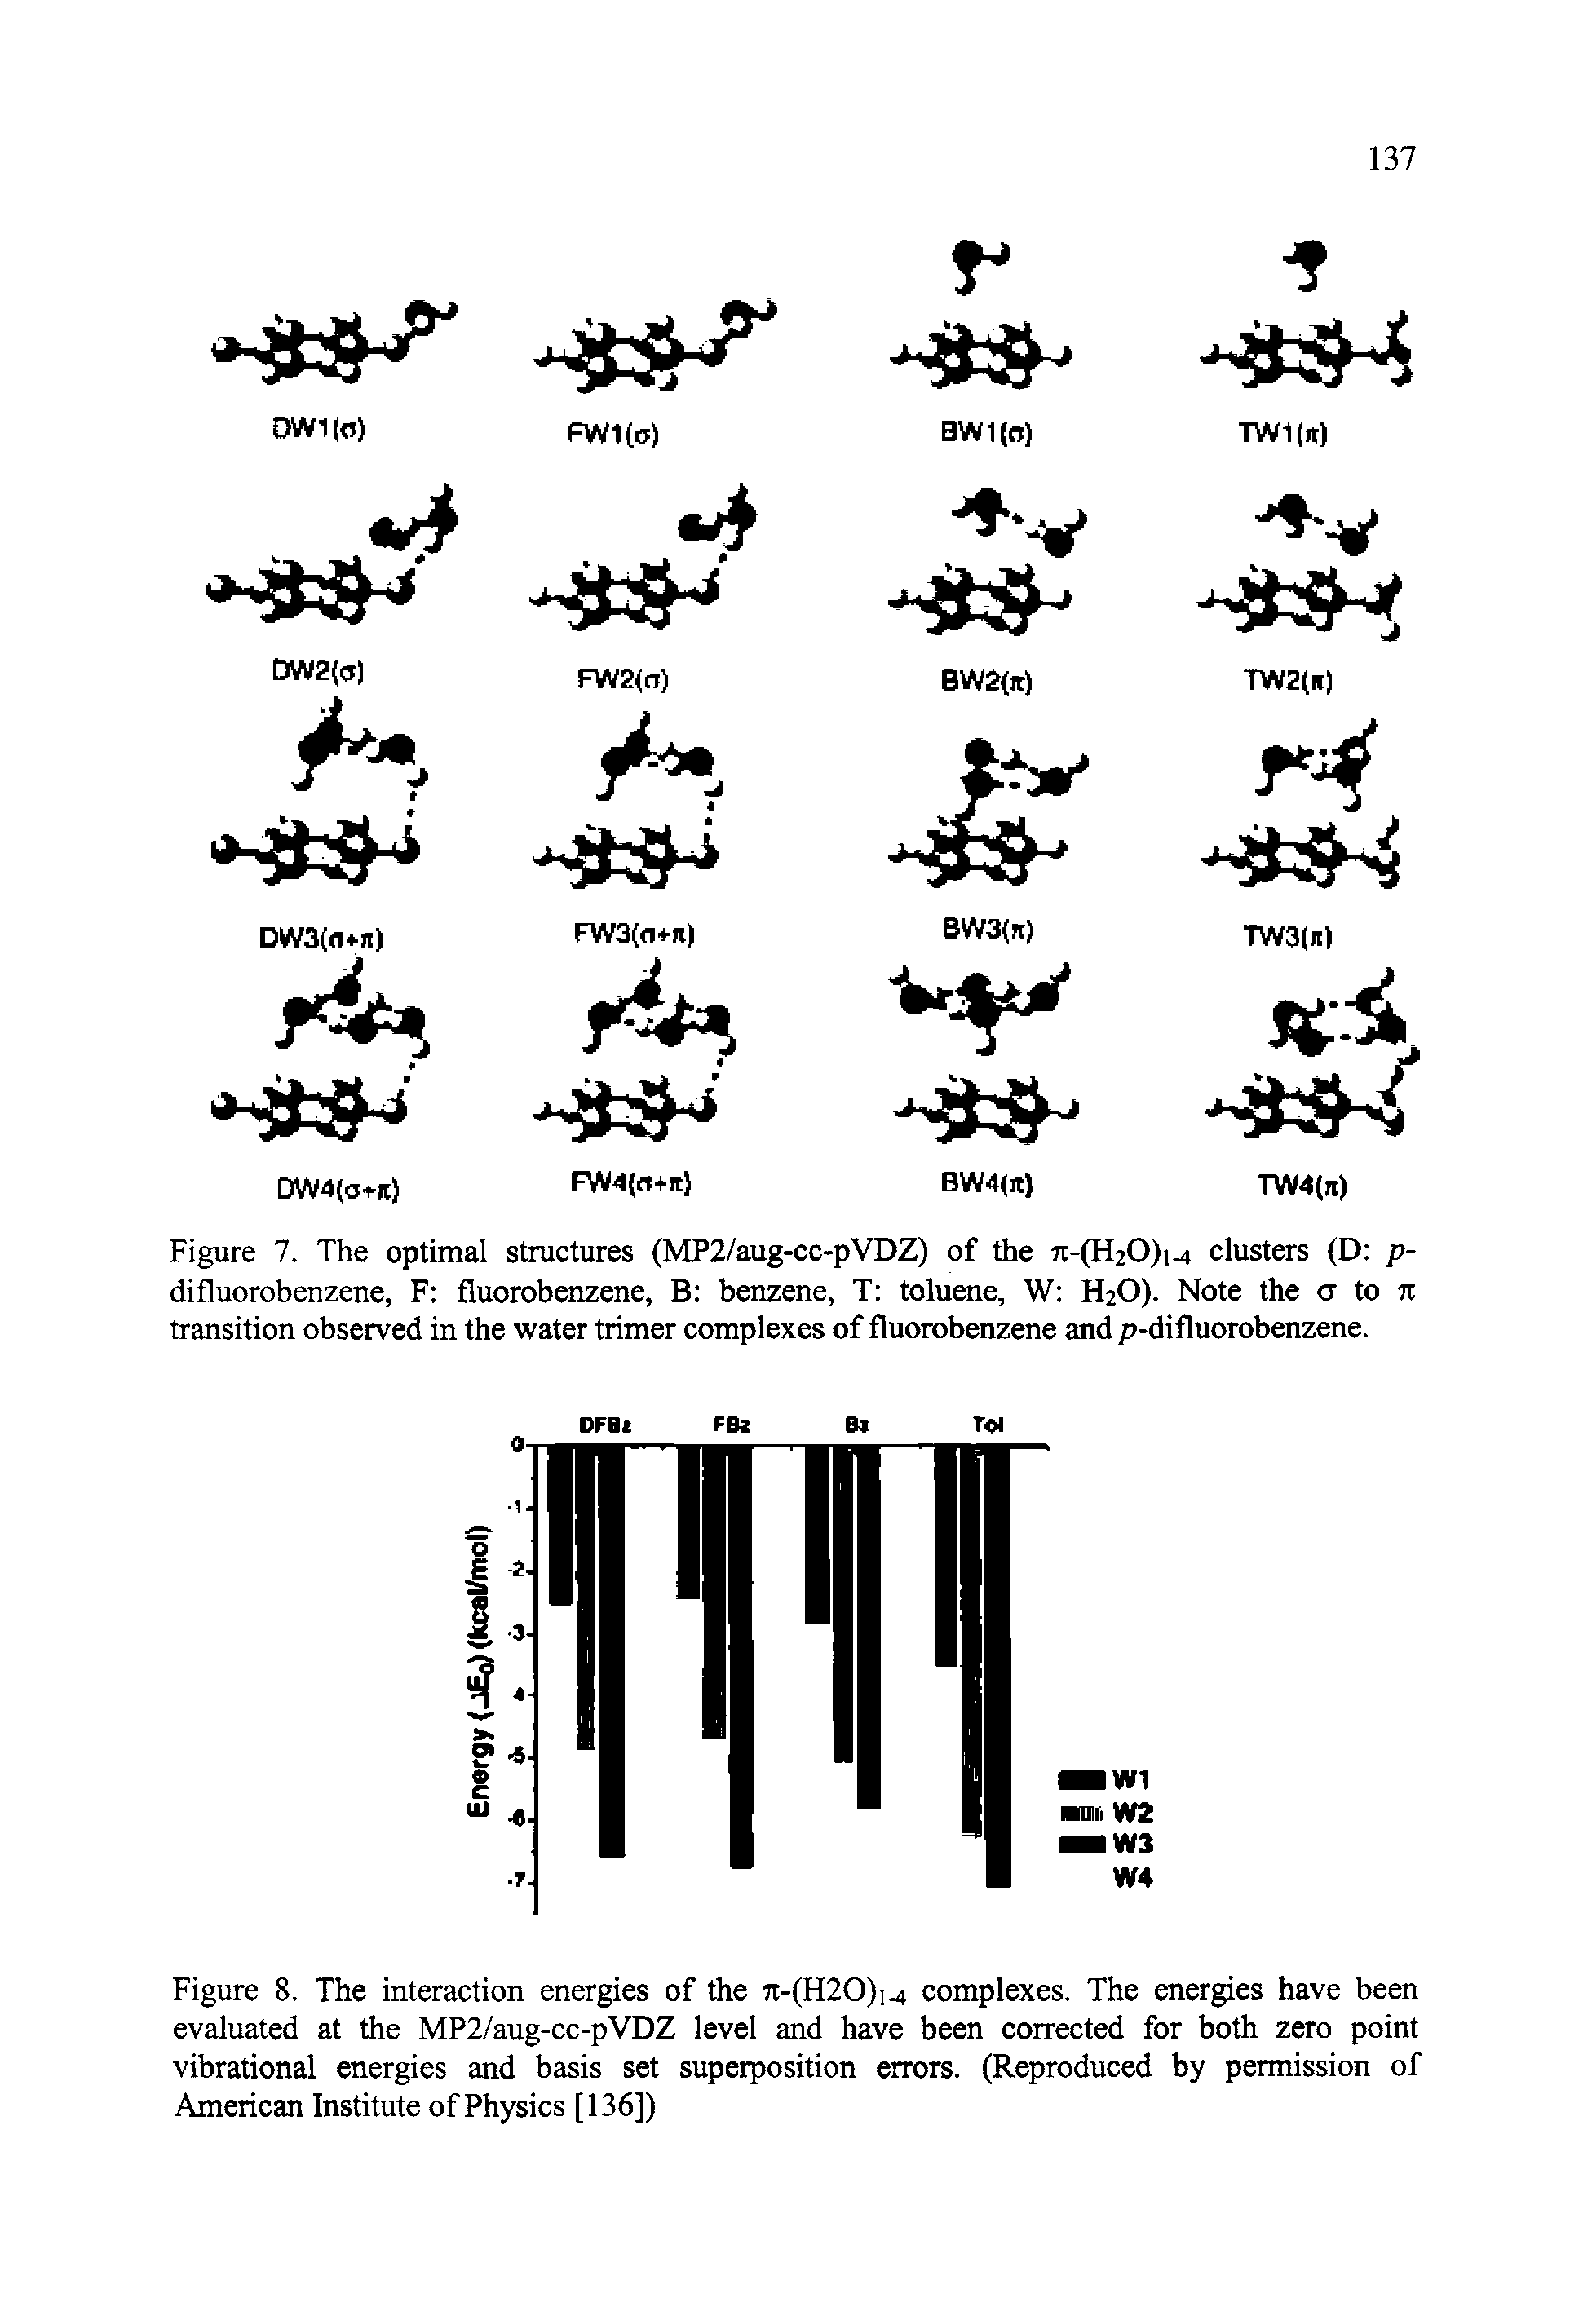 Figure 7. The optimal structures (MP2/aug-cc-pVDZ) of the 7i-(H20)m clusters (D p-difluorobenzene, F fluorobenzene, B benzene, T toluene, W H2O). Note the ct to 7t transition observed in the water trimer complexes of fluorobenzene and p-difluorobenzene.